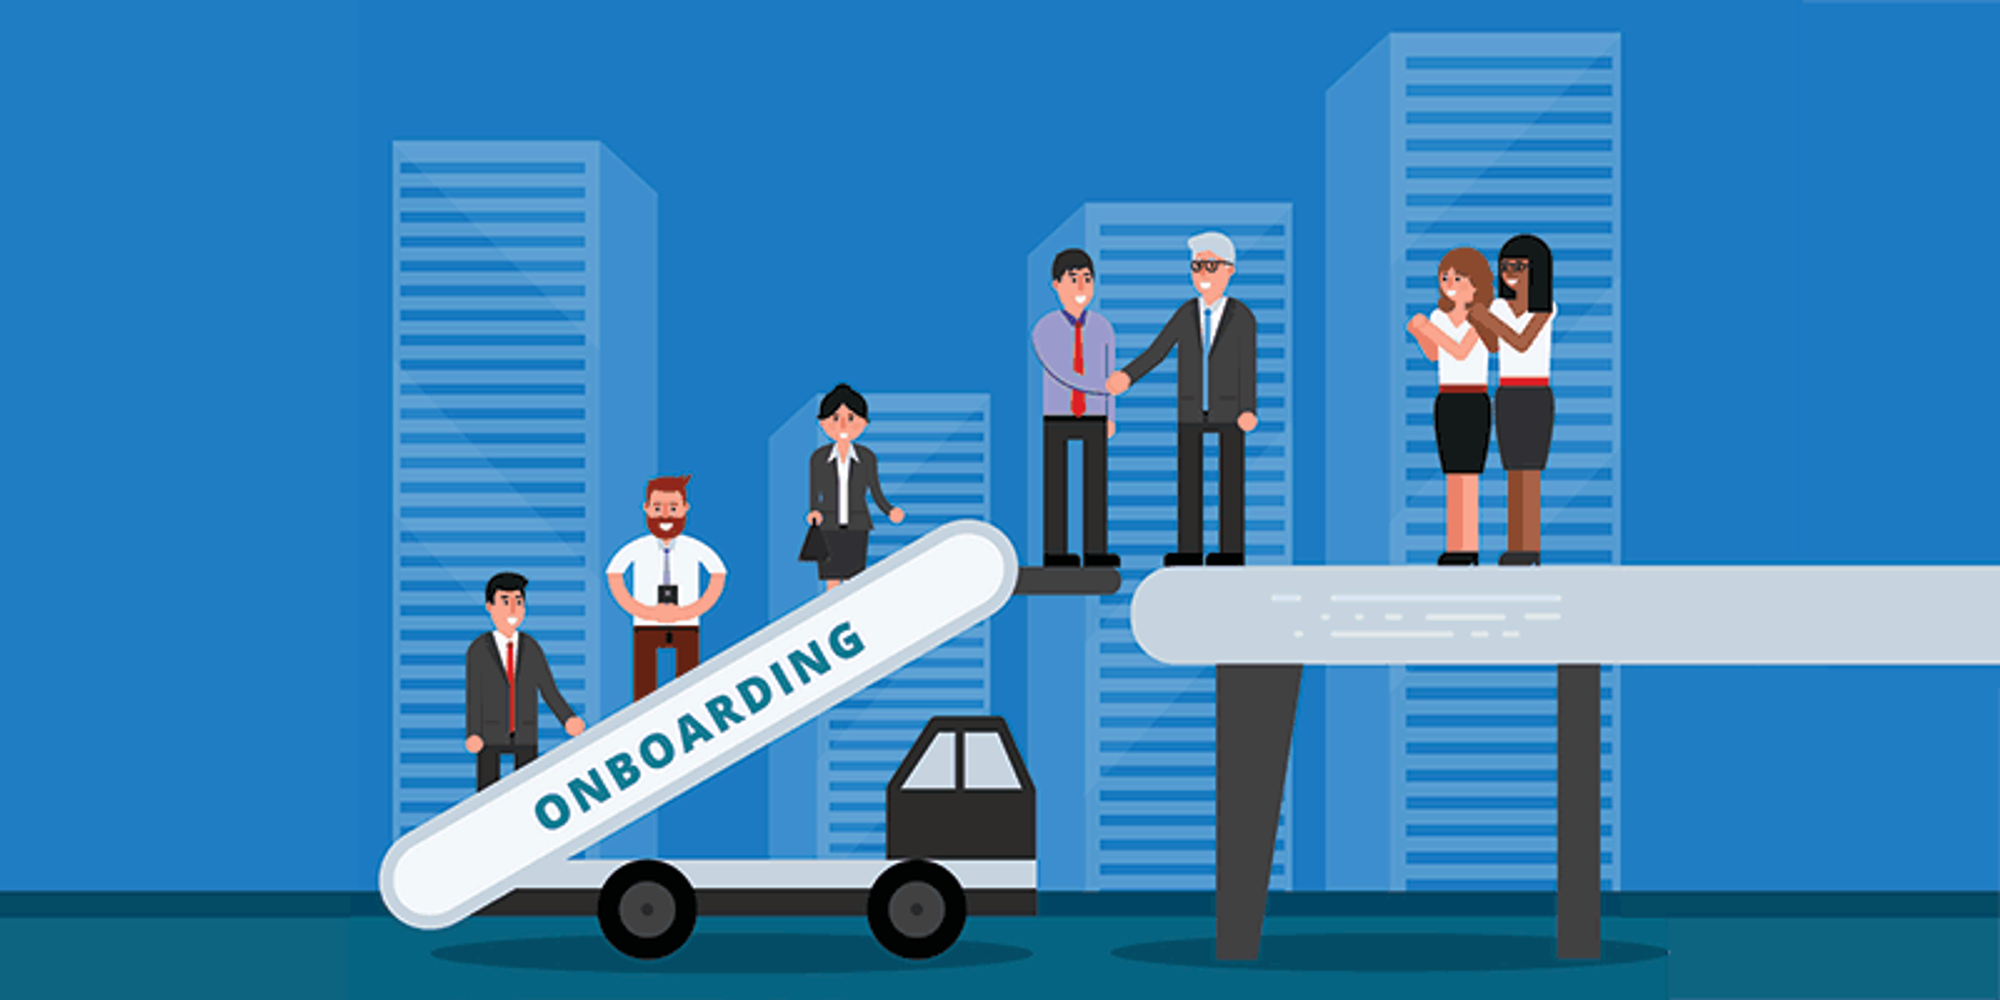                                                            Implementing onboarding process